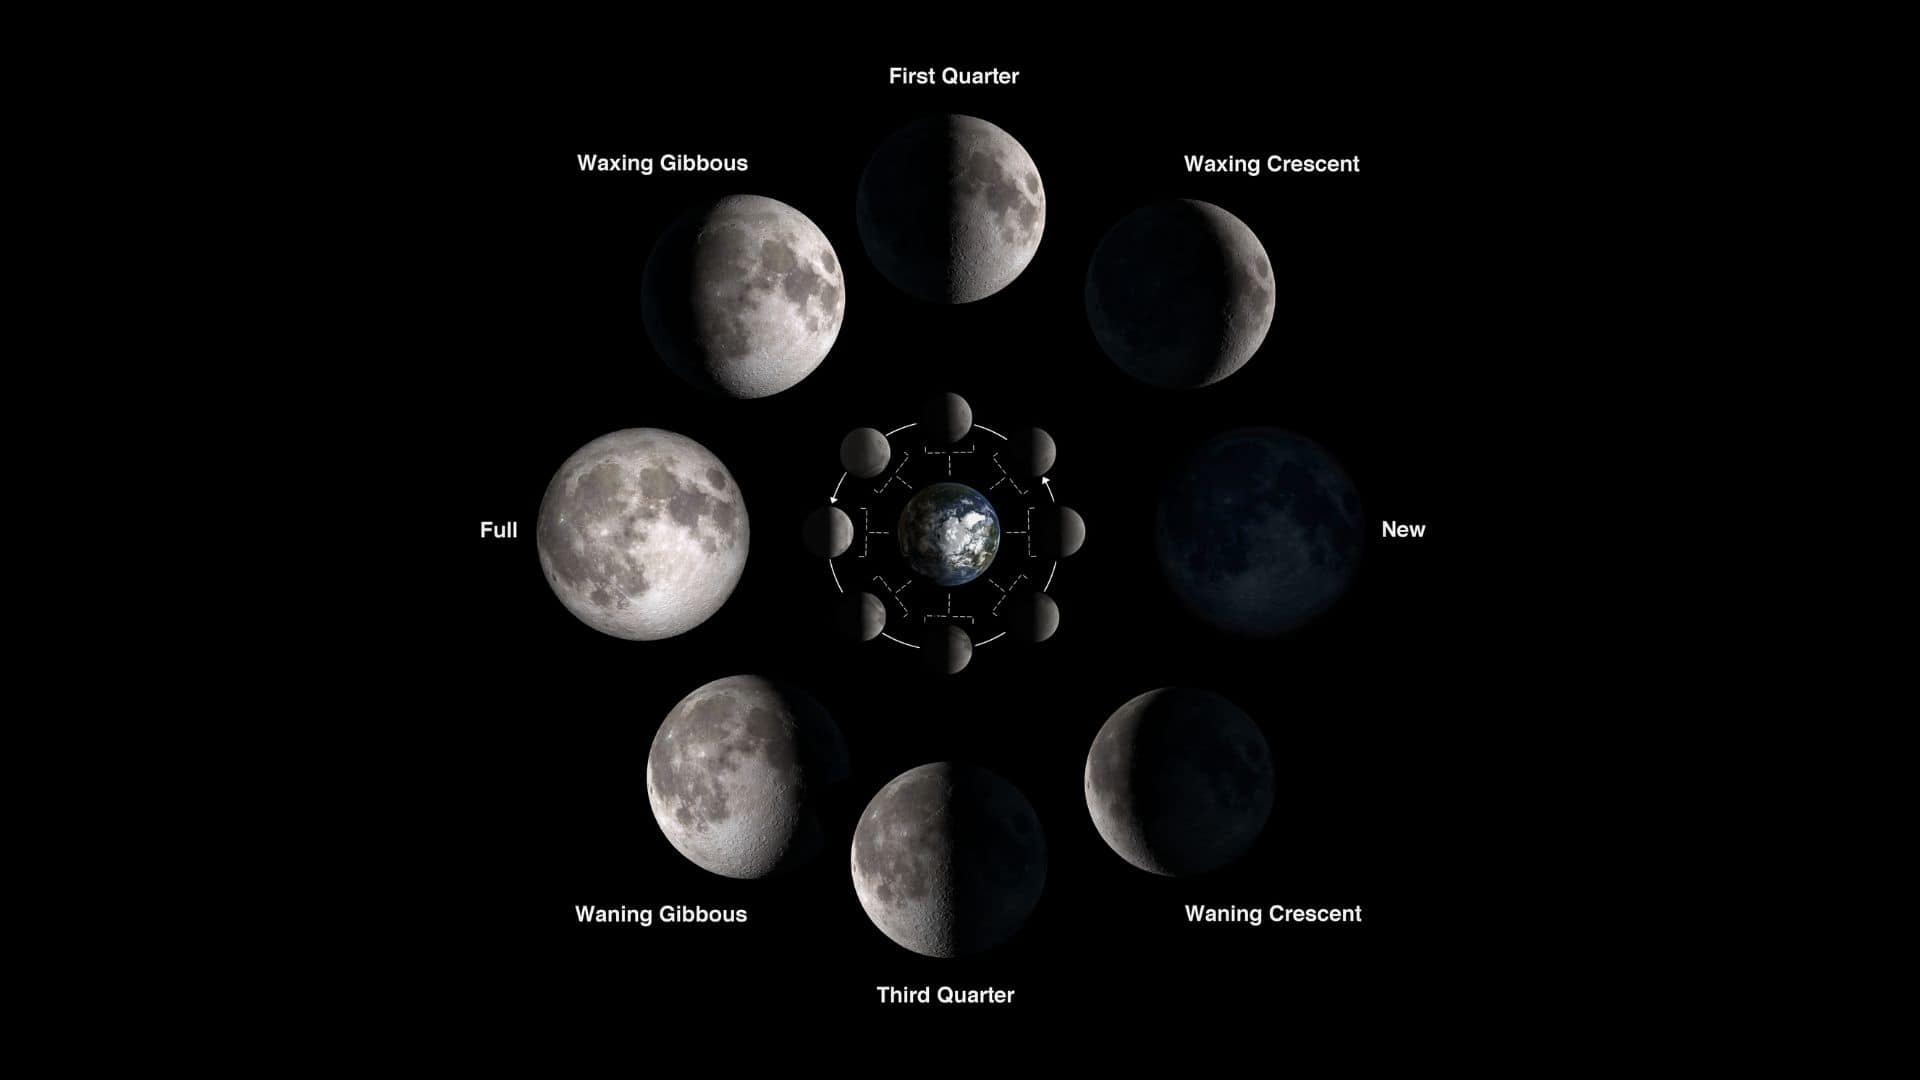 All the phases of the Moon in a lunar phase cycle.